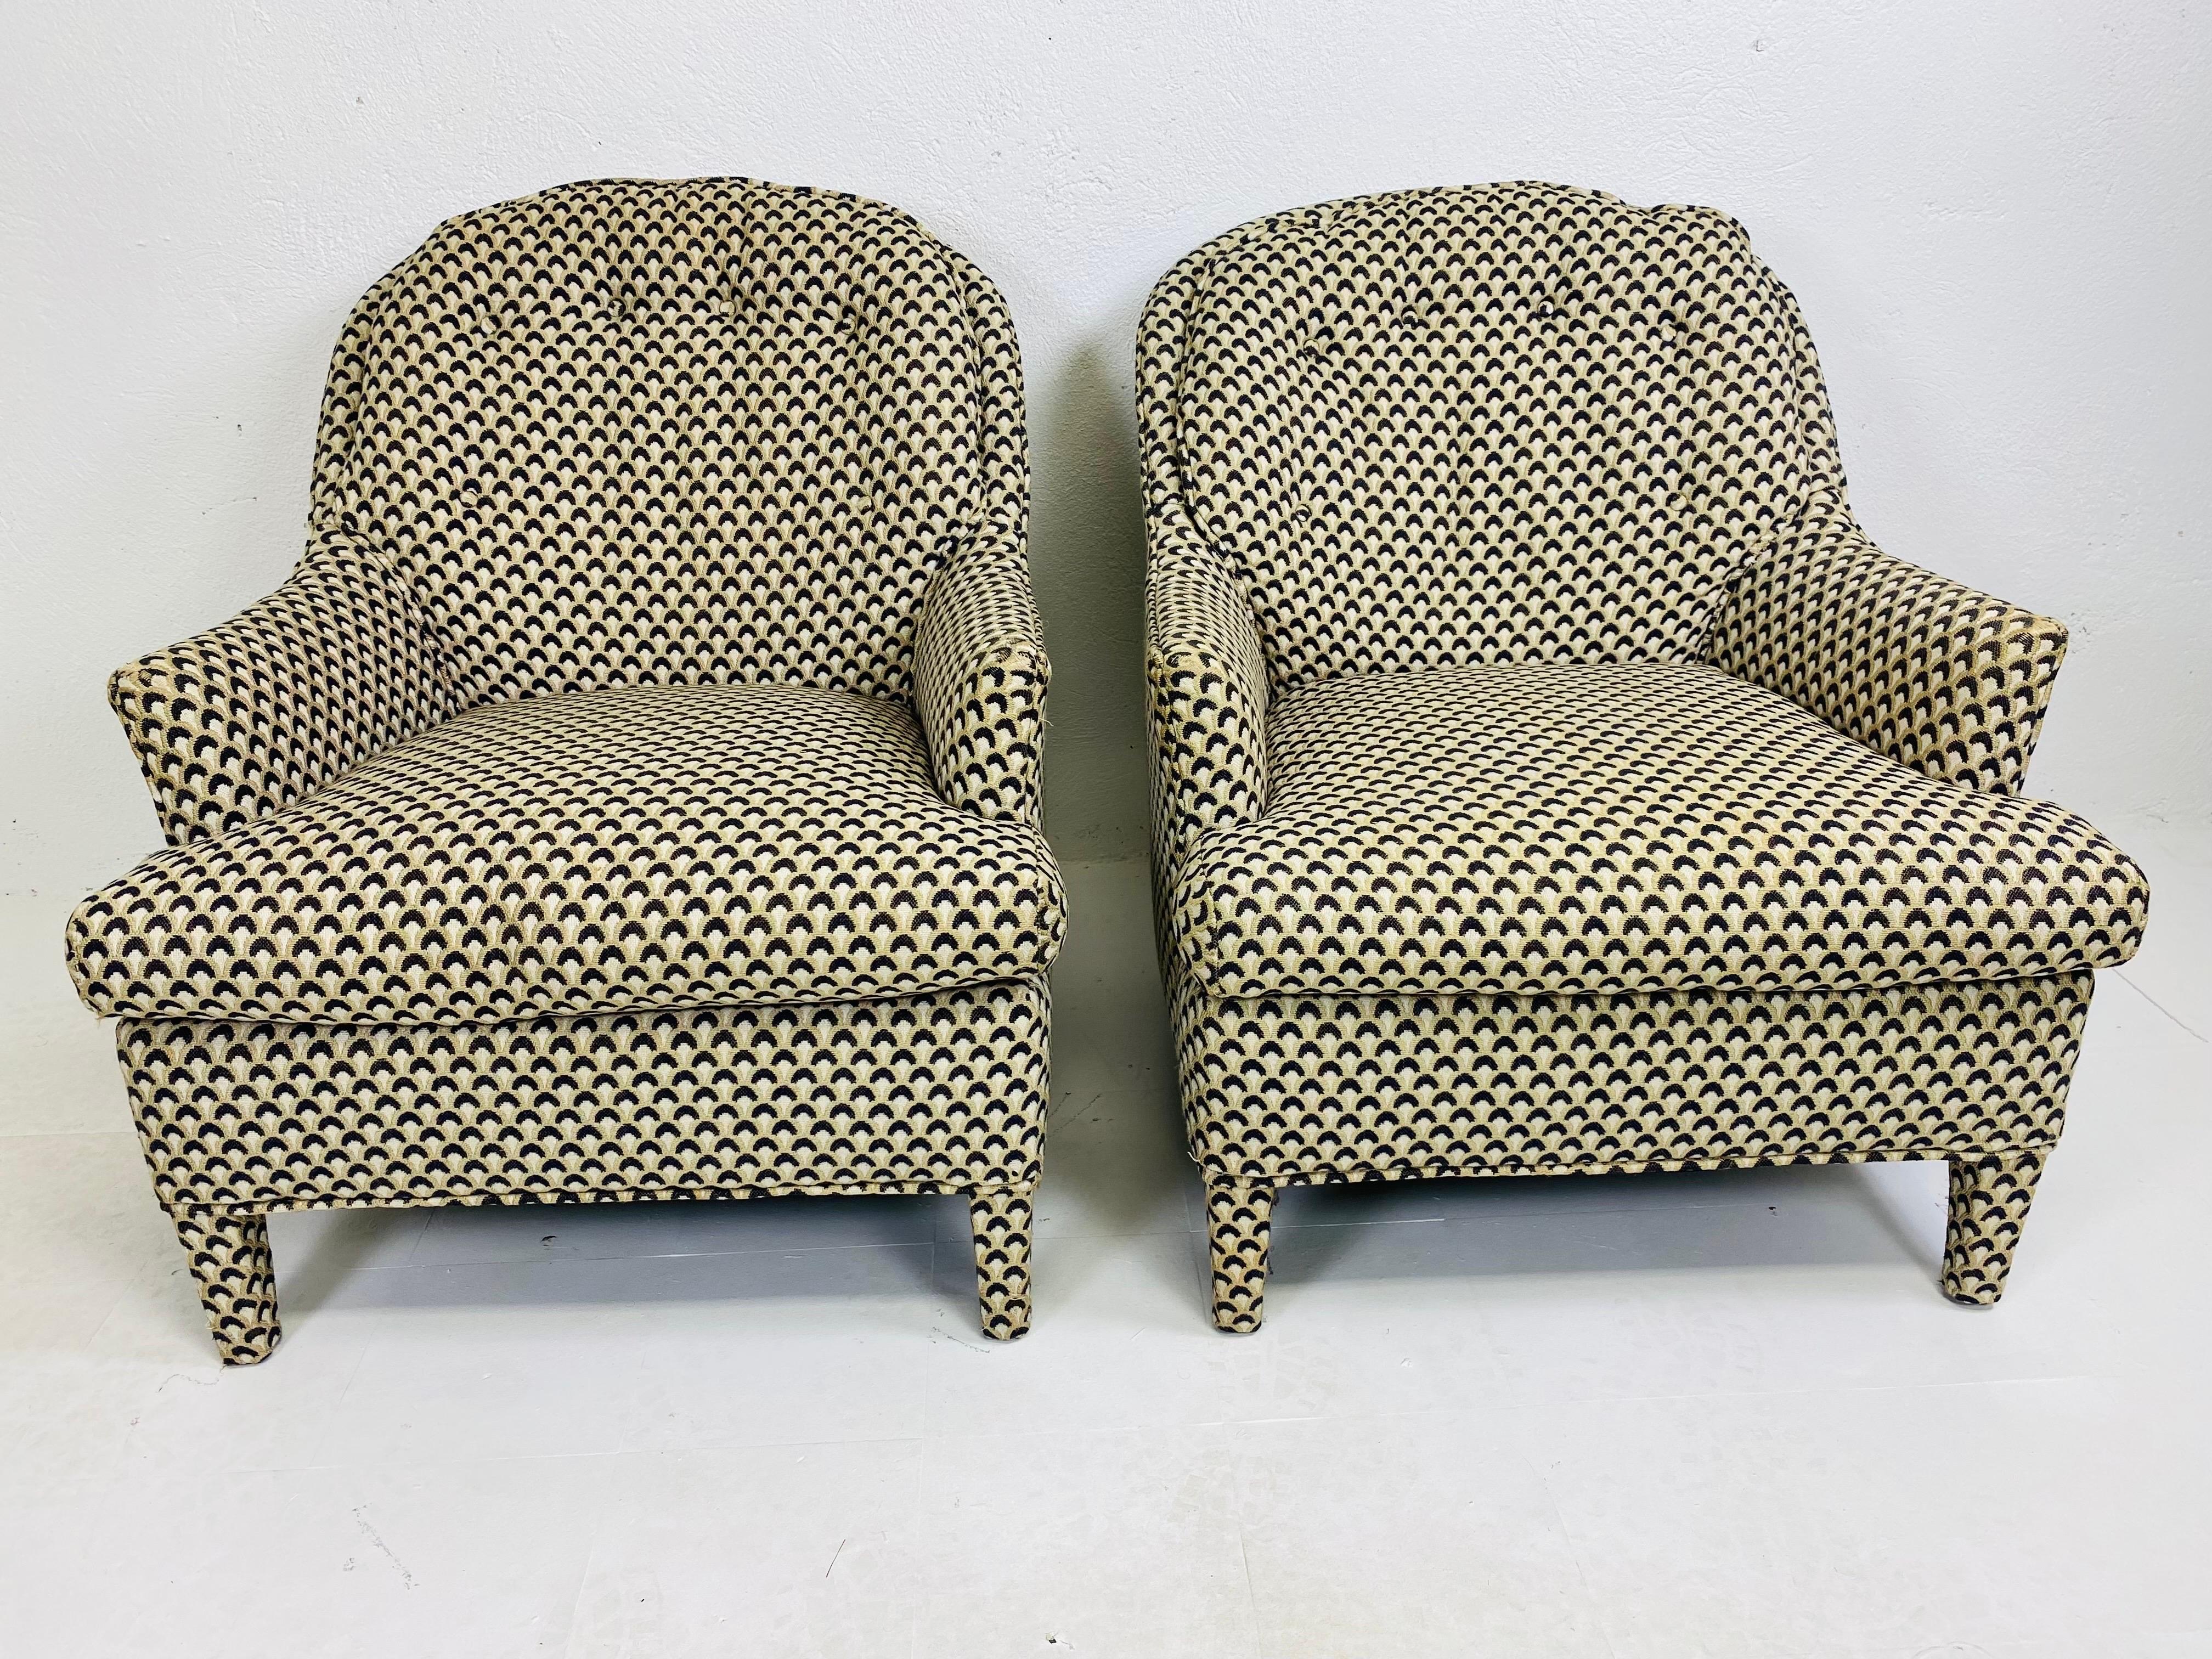 This is a pair of mid century modern upholstered club chairs. This pair of club chairs have its original black and white geometric velvet fabric. These club chairs have a persons leg and feature buttons on the back pillows. These chairs are